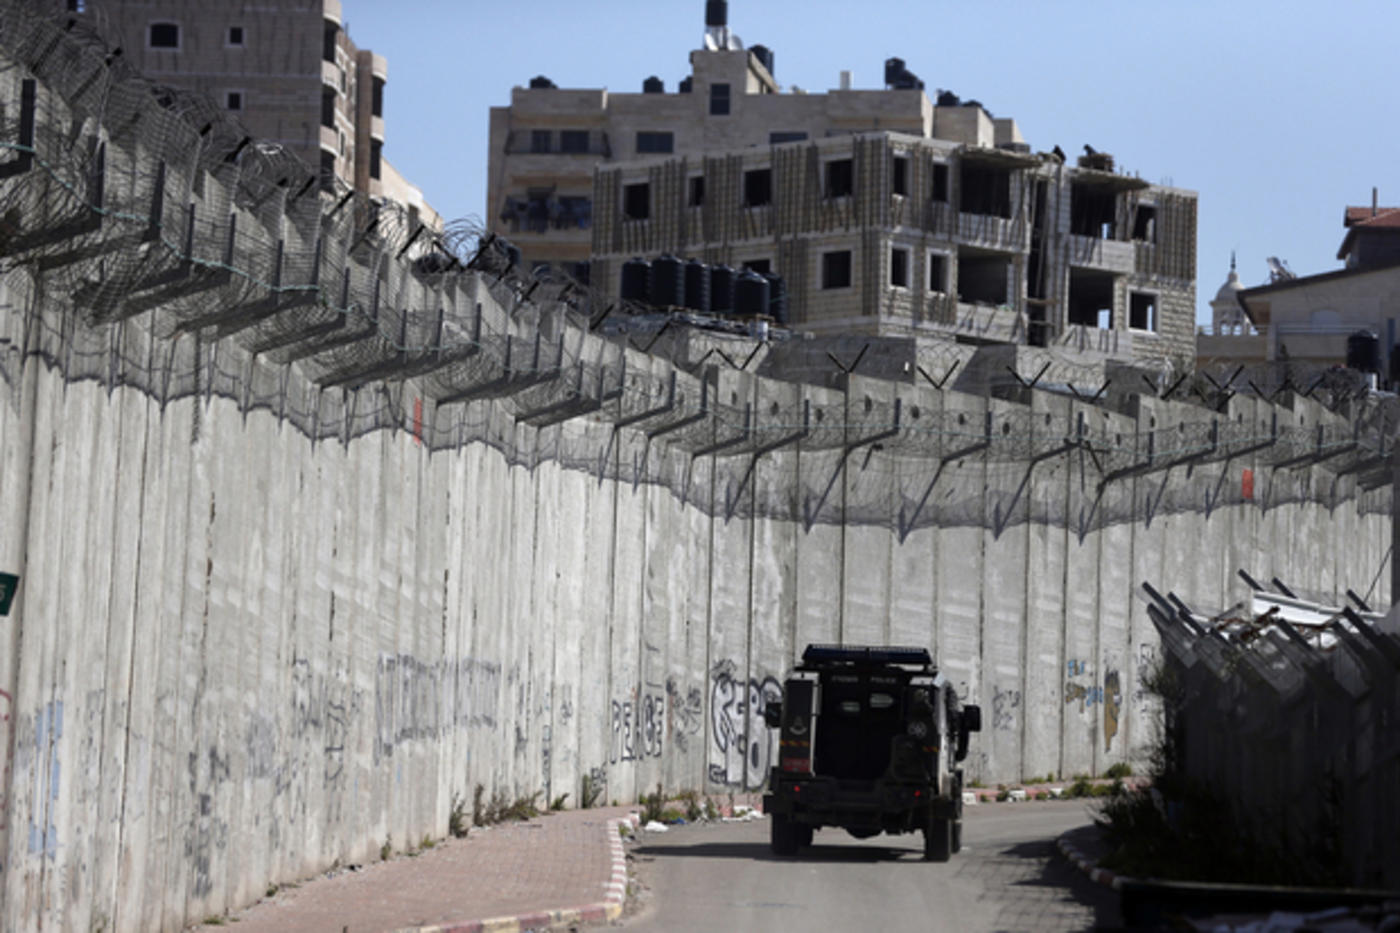 Israel’s separation wall is considered to be illegal under international law (AFP)